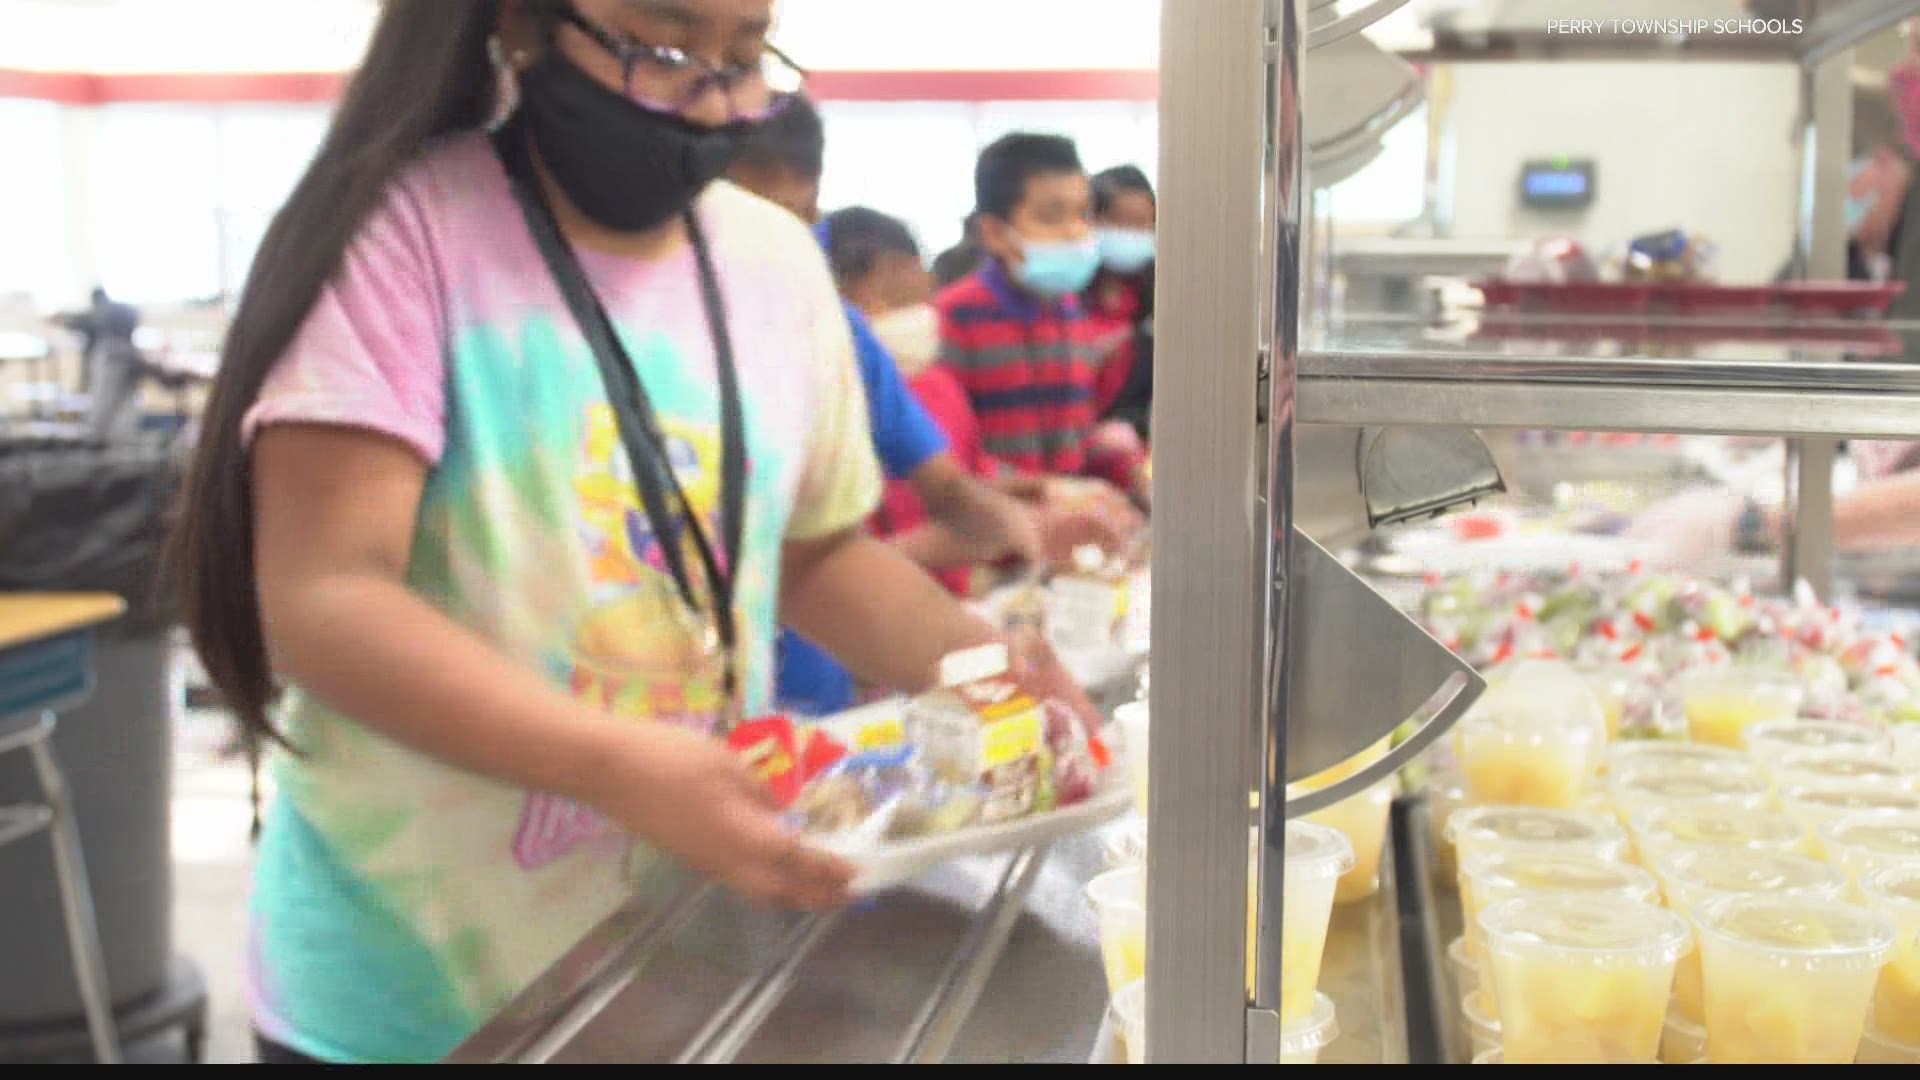 With federal funds, most schools throughout the country will be able to provide free meals to students during the pandemic.